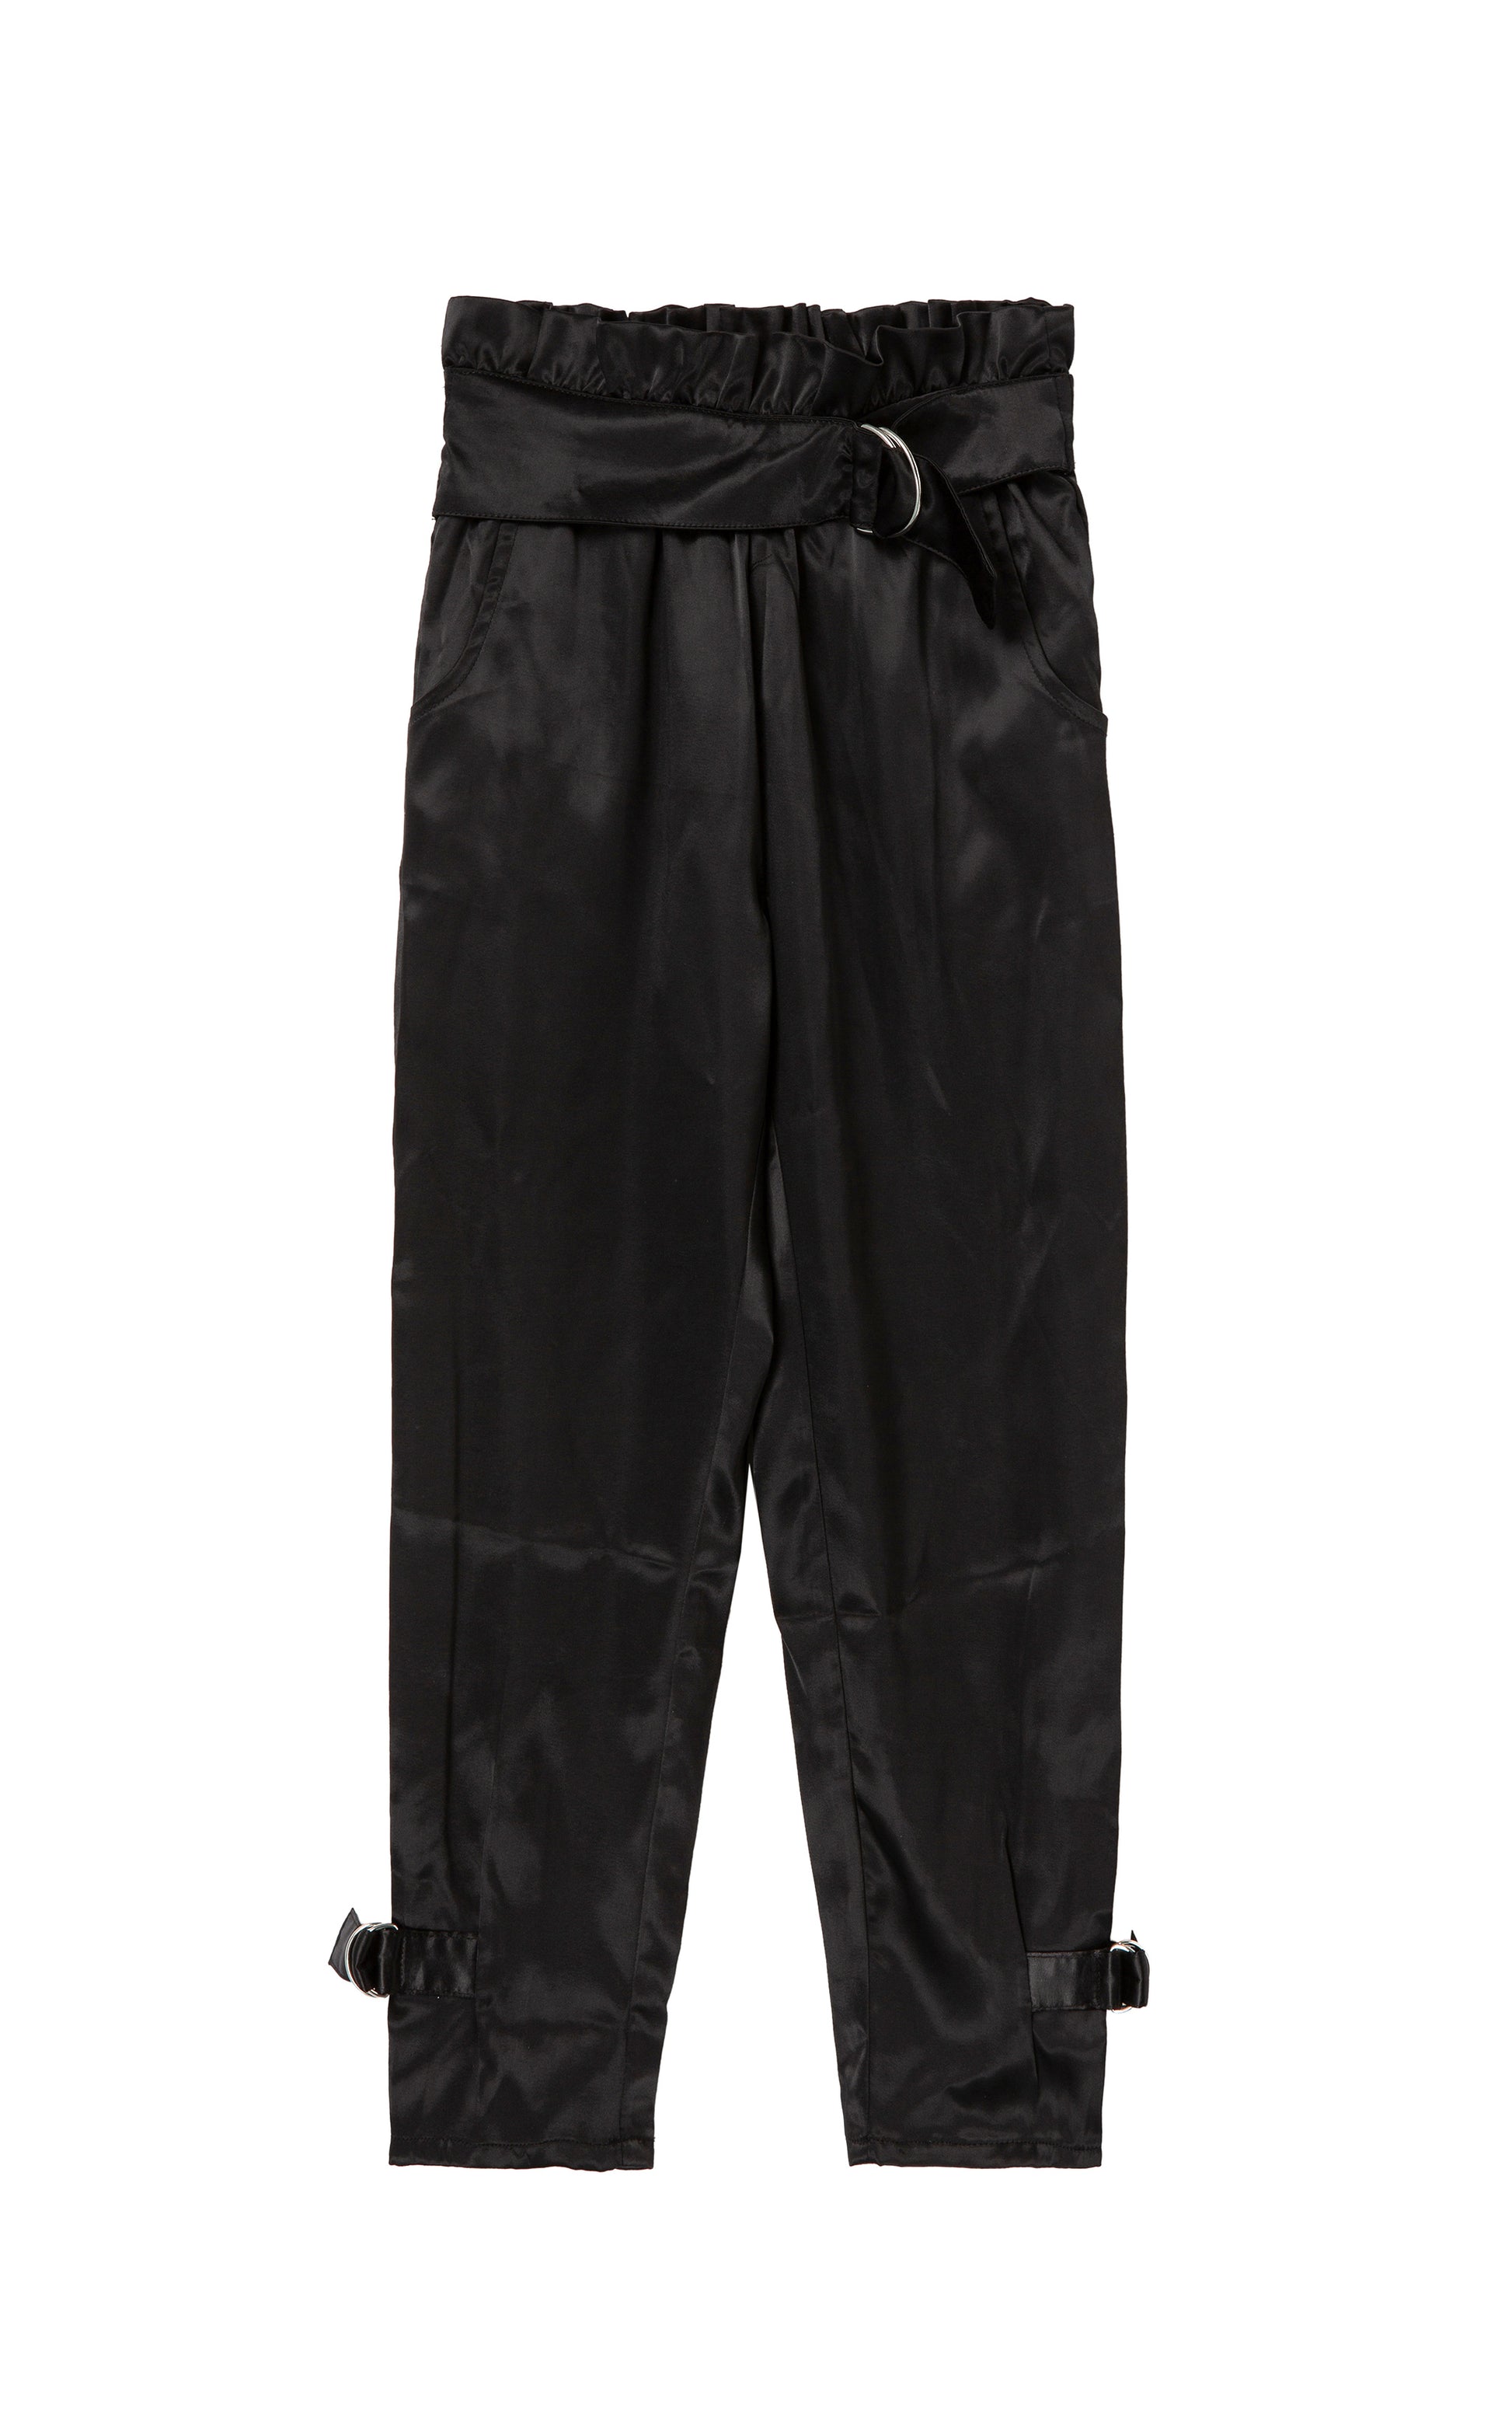 Black belted sateen pants with ankle buckles